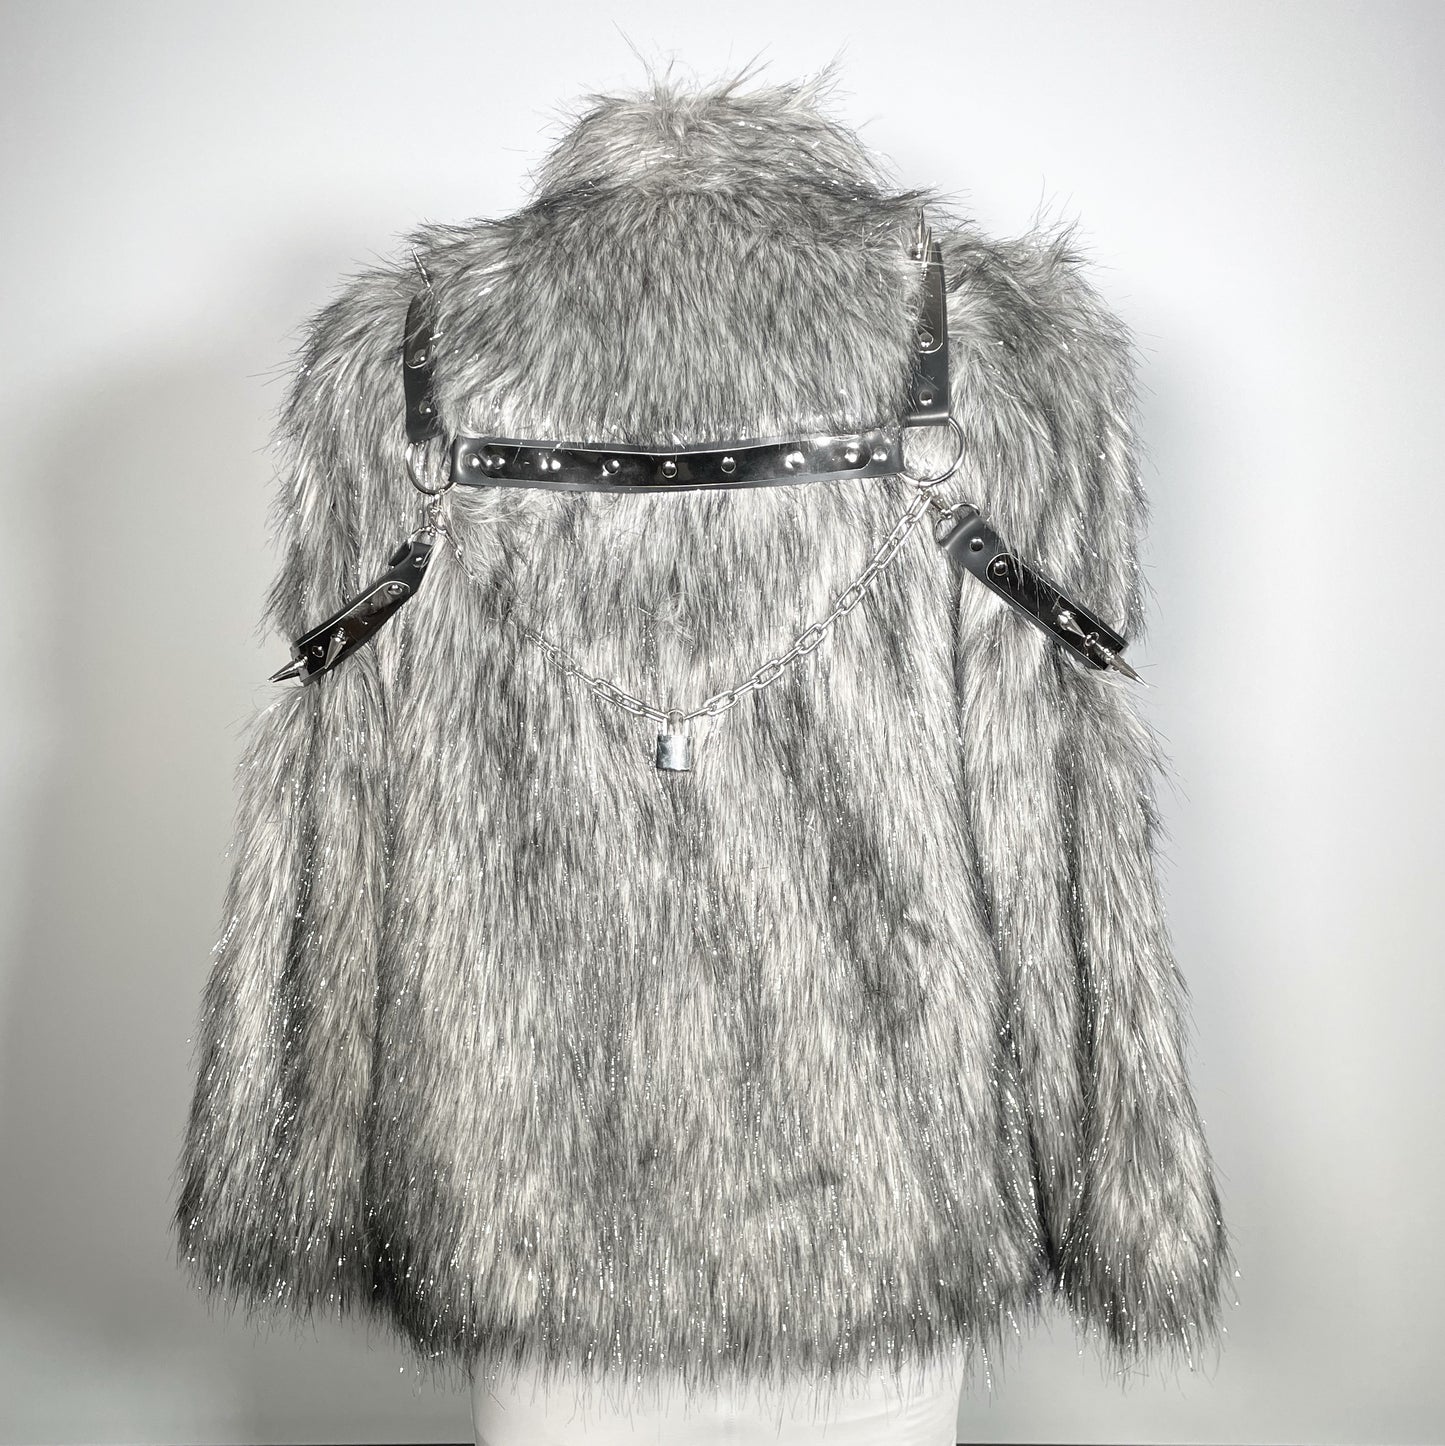 Grey with Silver Tinsel, Silver and Black Spiked Shoulder Harness Faux Fur Jacket